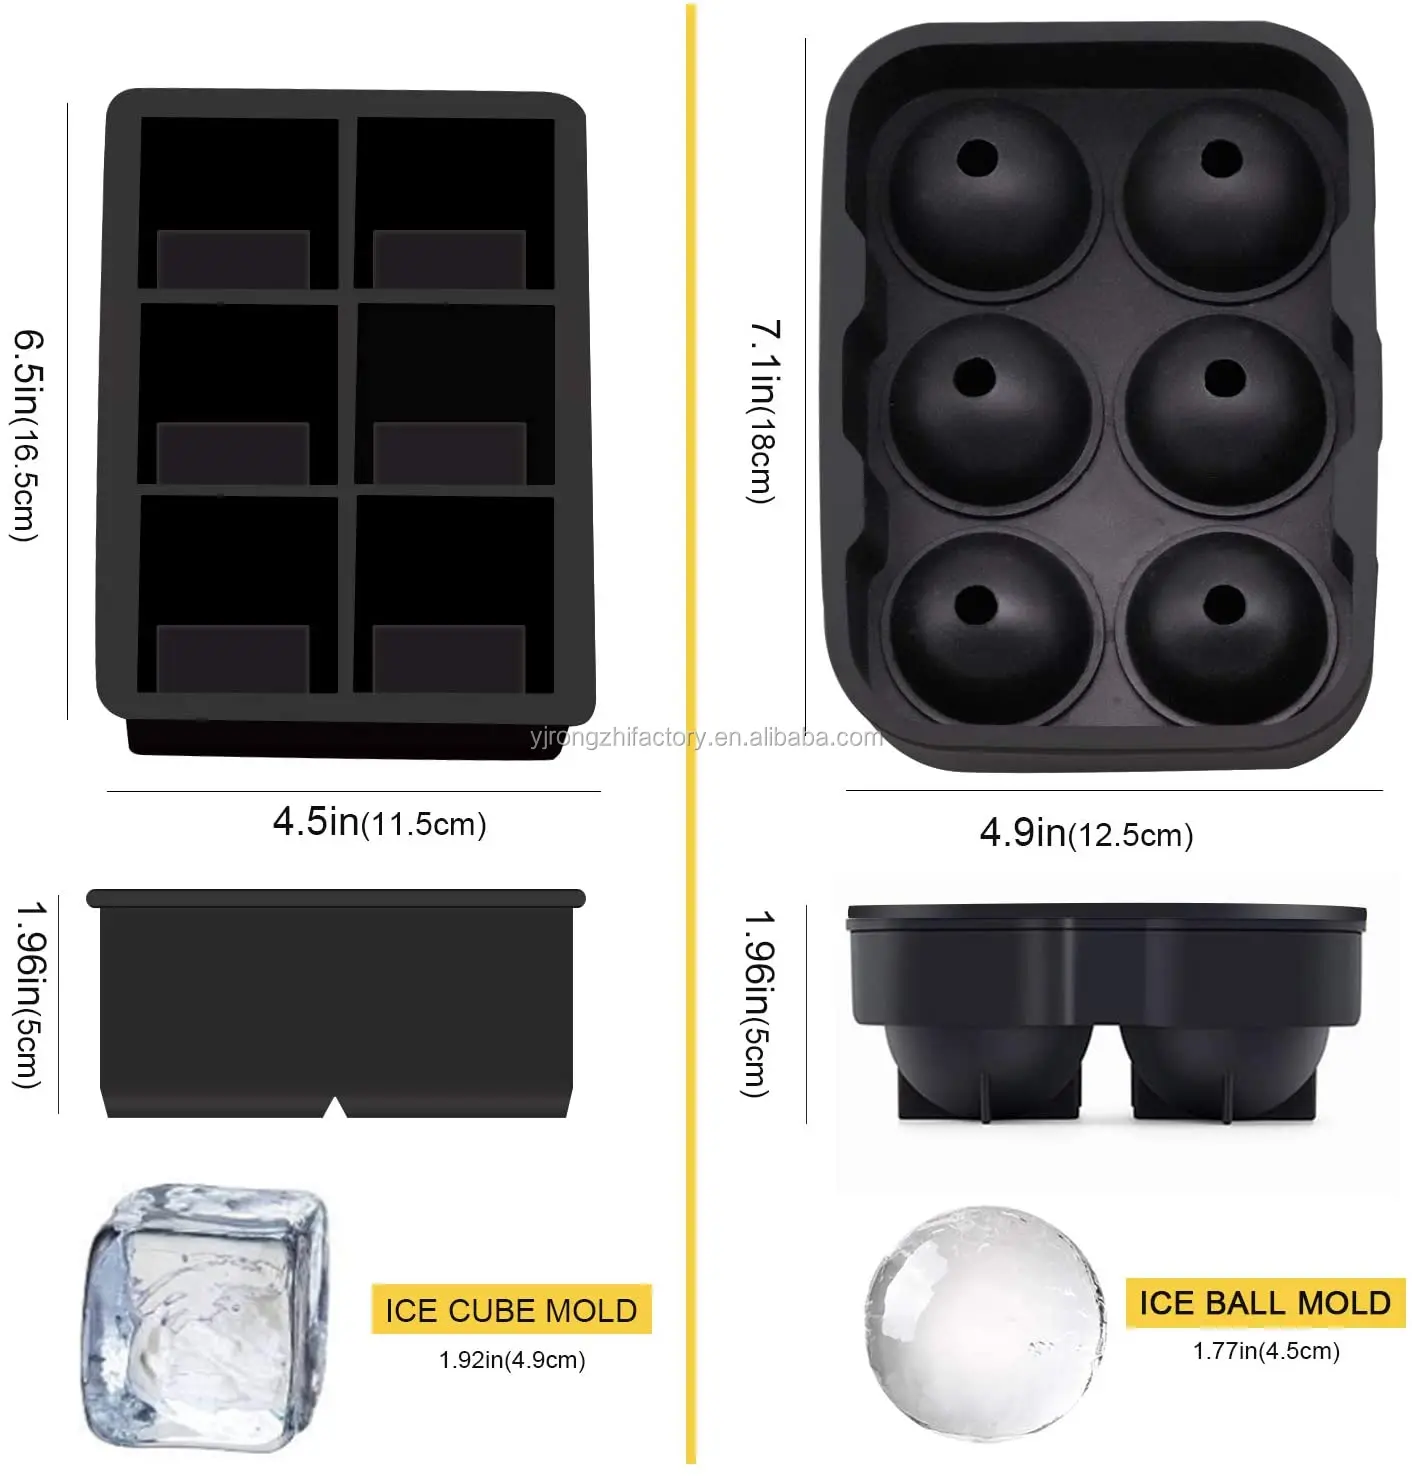 

Sphere Ice Ball Maker with Lid and Large Square Ice Cube Molds for Whiskey,Reusable and BPA Free,Ice Cube Trays Silicone Set, Black